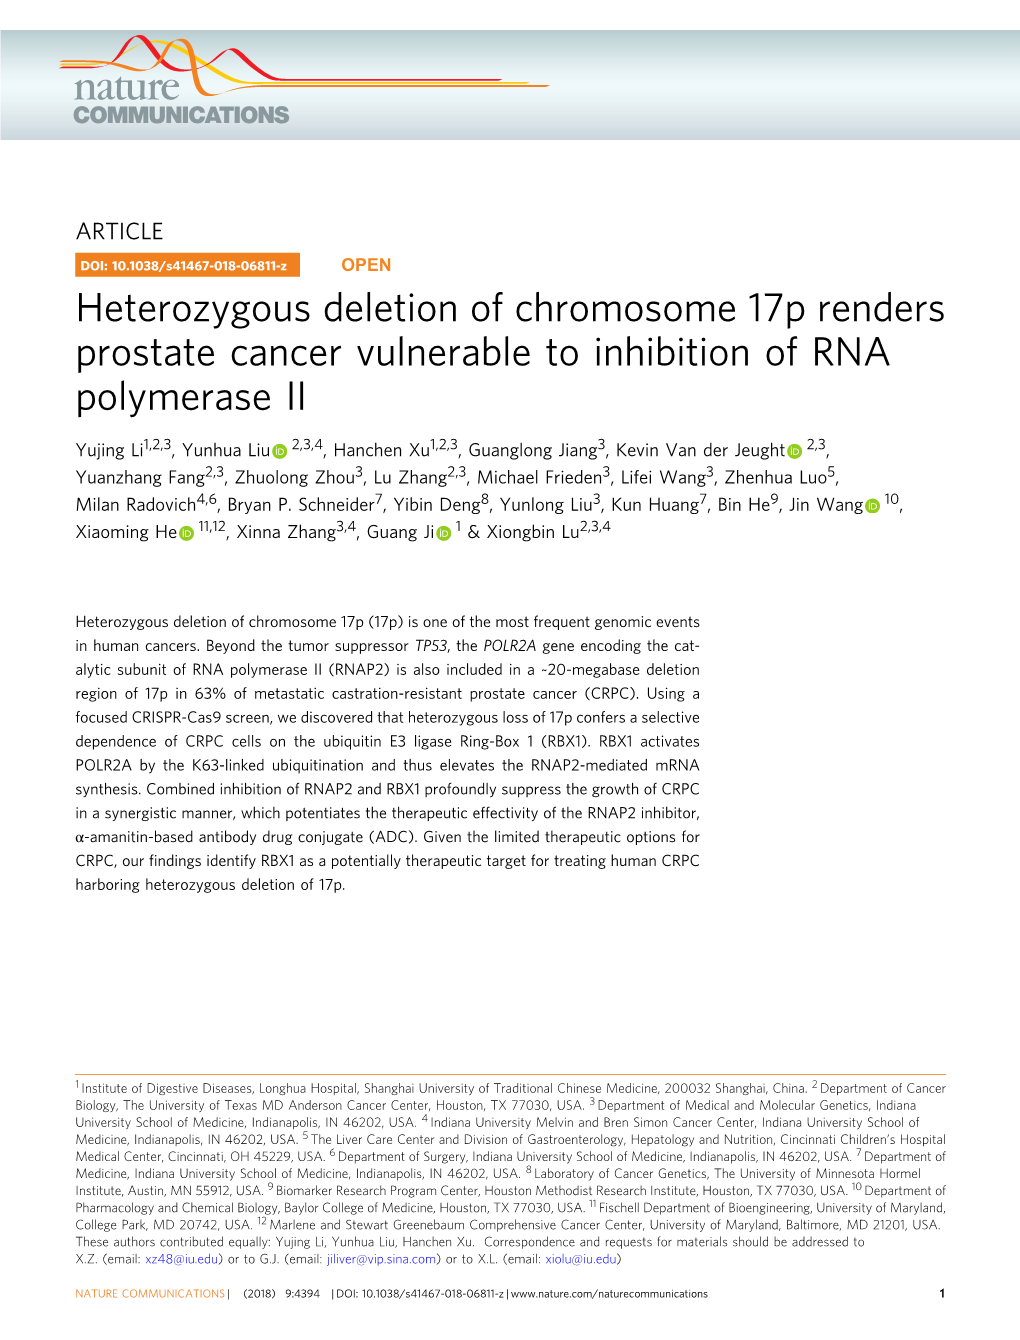 Heterozygous Deletion of Chromosome 17P Renders Prostate Cancer Vulnerable to Inhibition of RNA Polymerase II